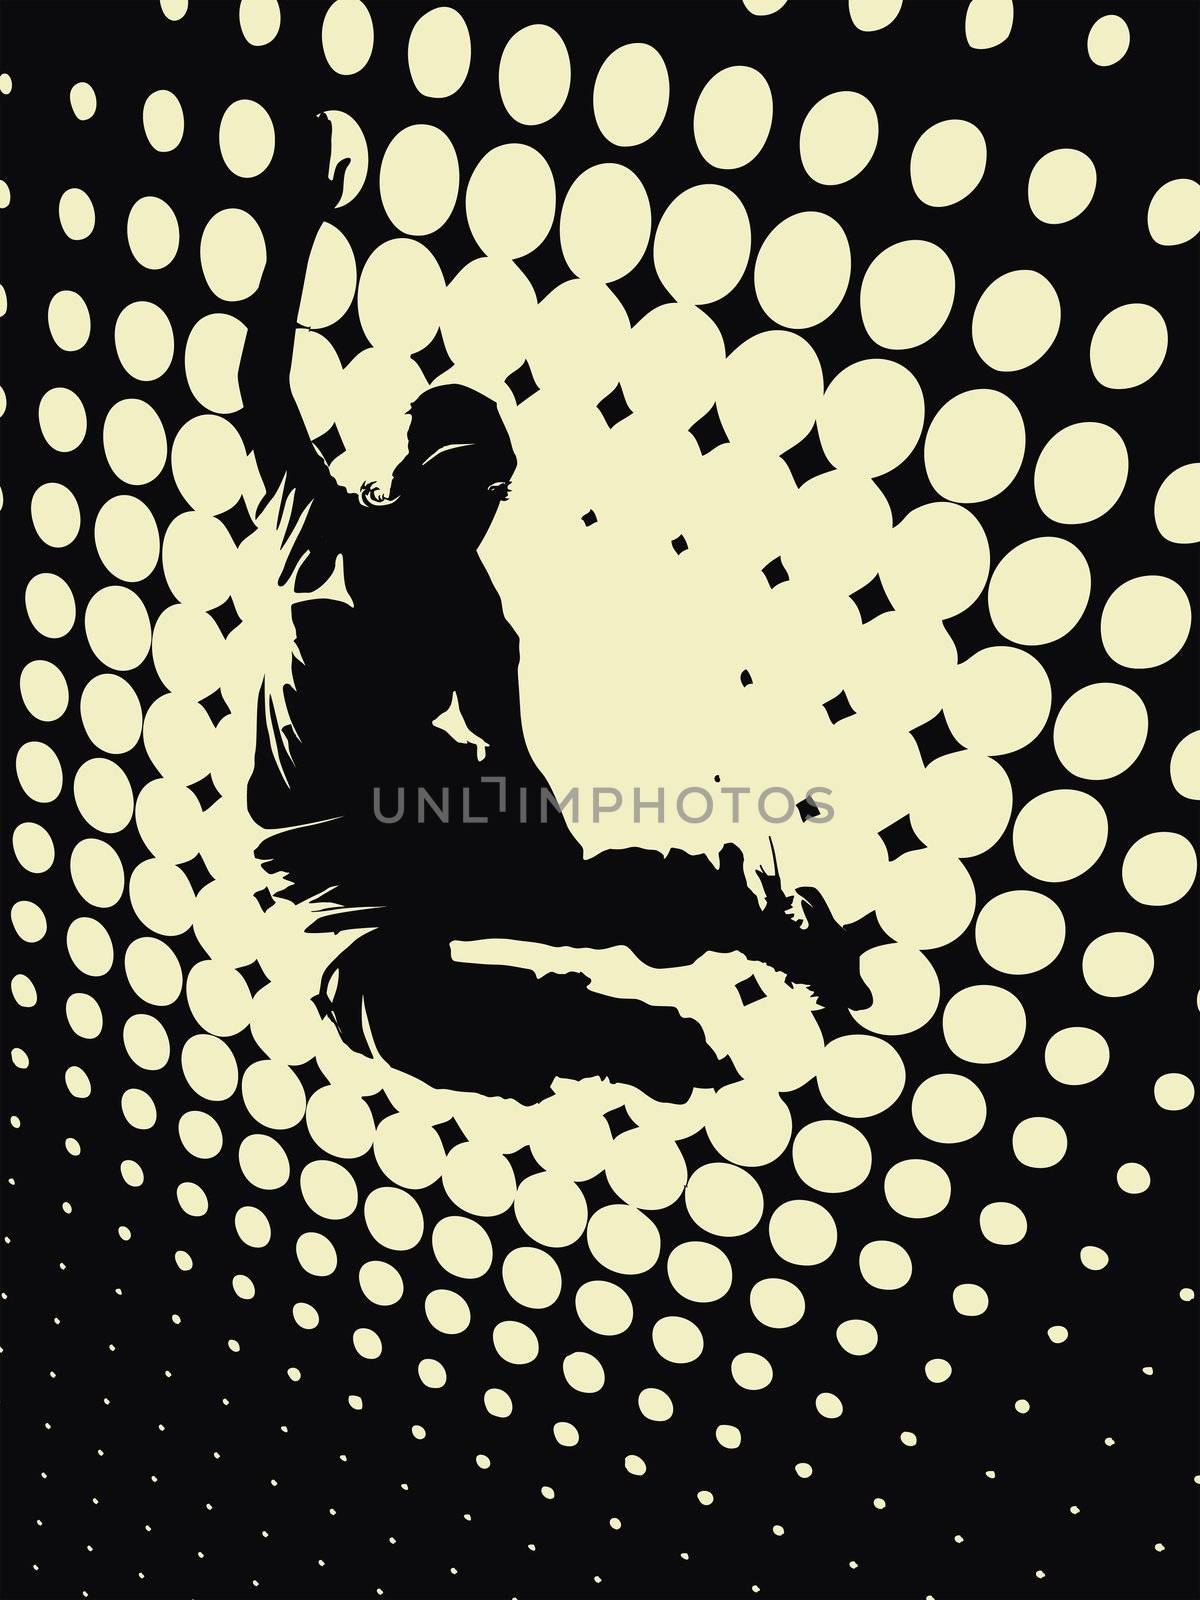 sport concept with abstract background with dots